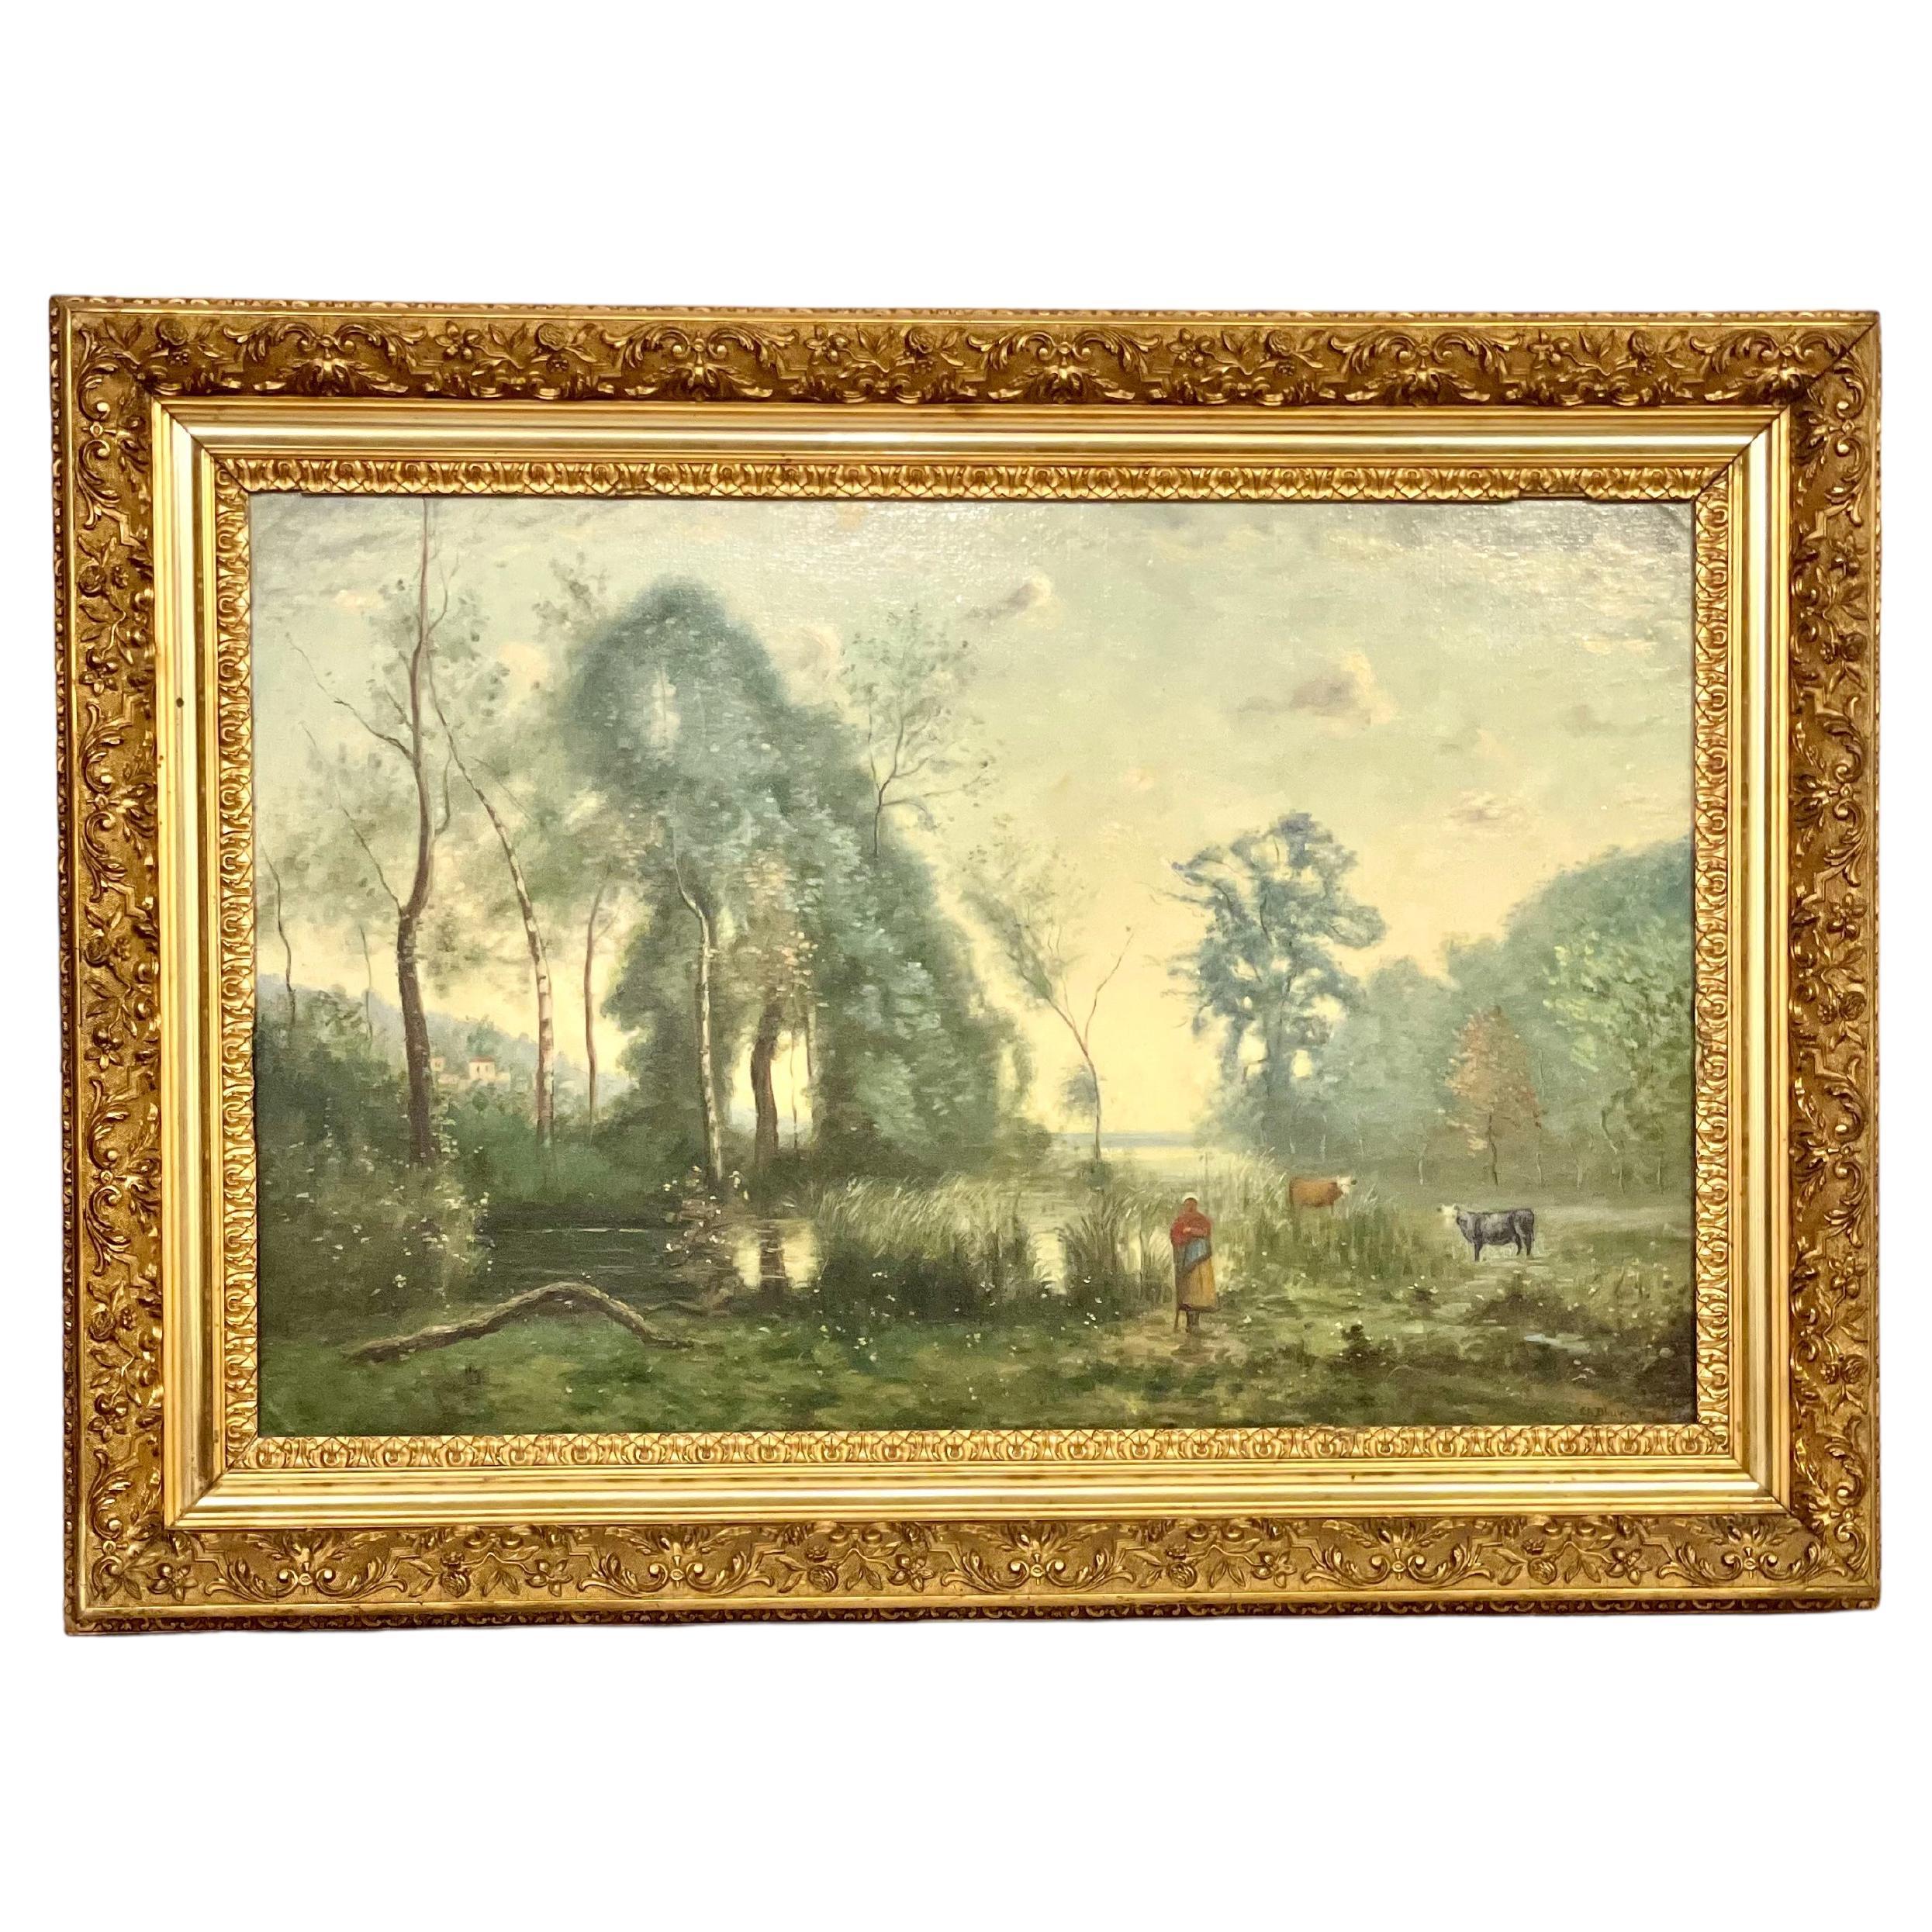 Large Oil on Panel 'The Cowherder by the Pond', by Charles Dhuin